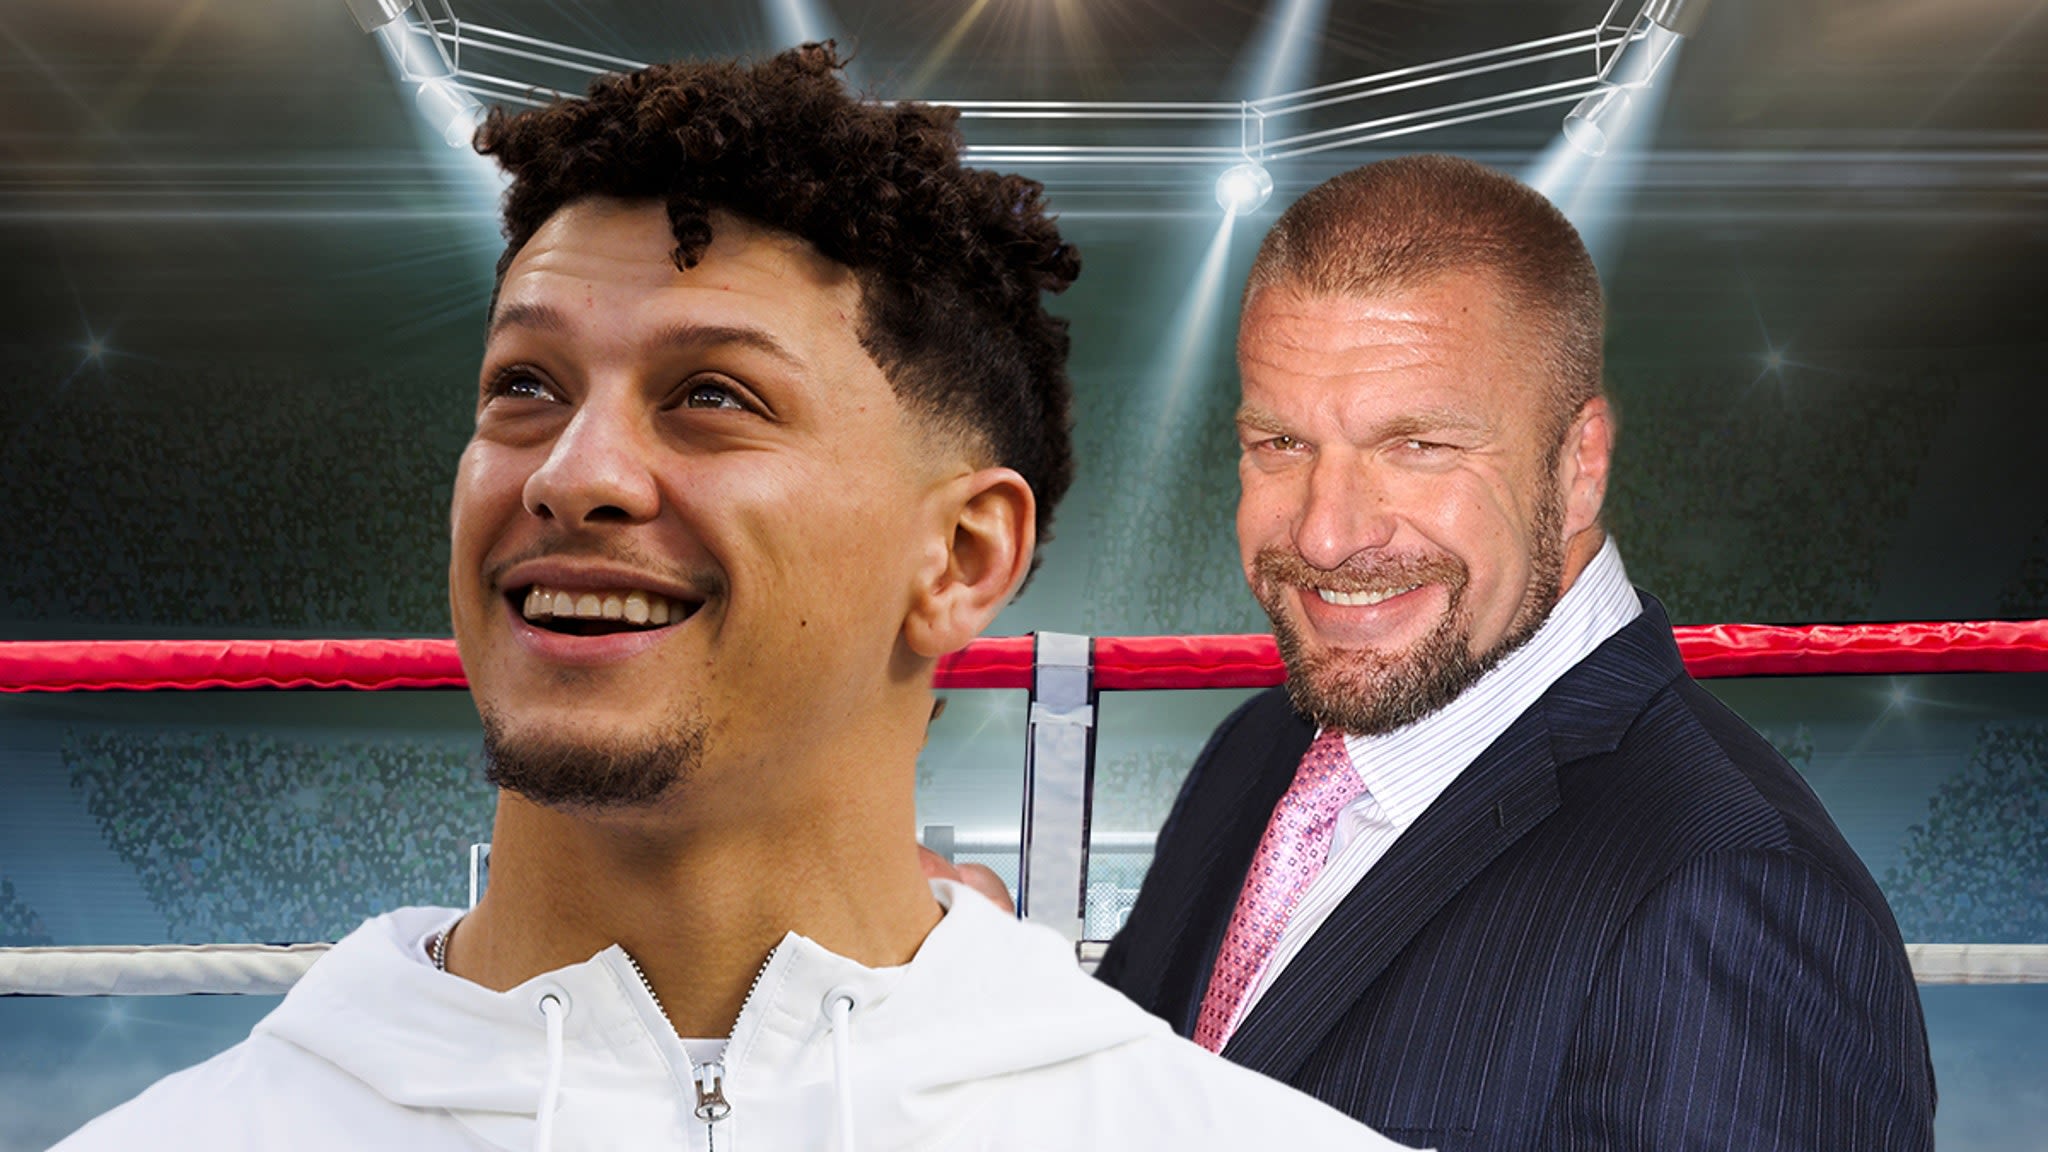 Triple H Invites Patrick Mahomes To Fight In WWE Ring, 'Let Me Know When!'